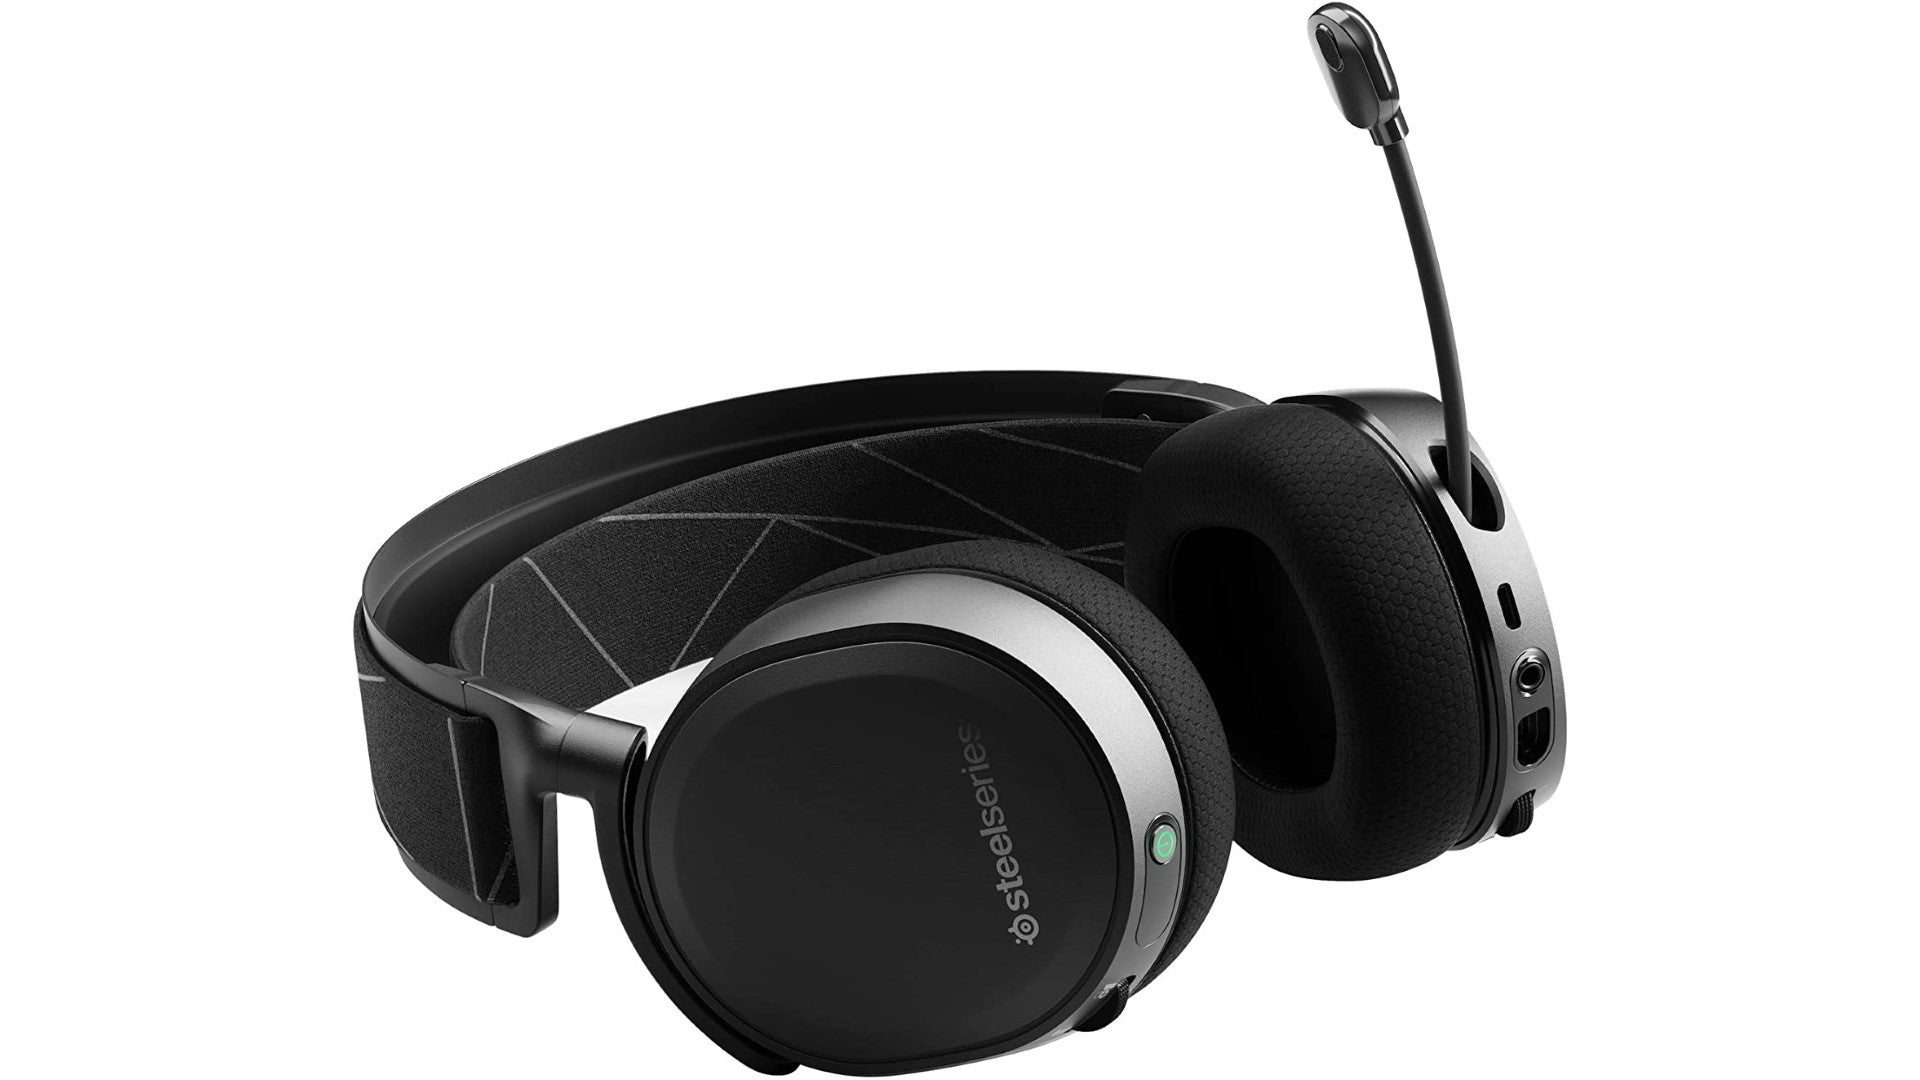 Image for Black Friday deal spotlight: Get £50/$50 off the SteelSeries Arctis 7 wireless gaming headset right now